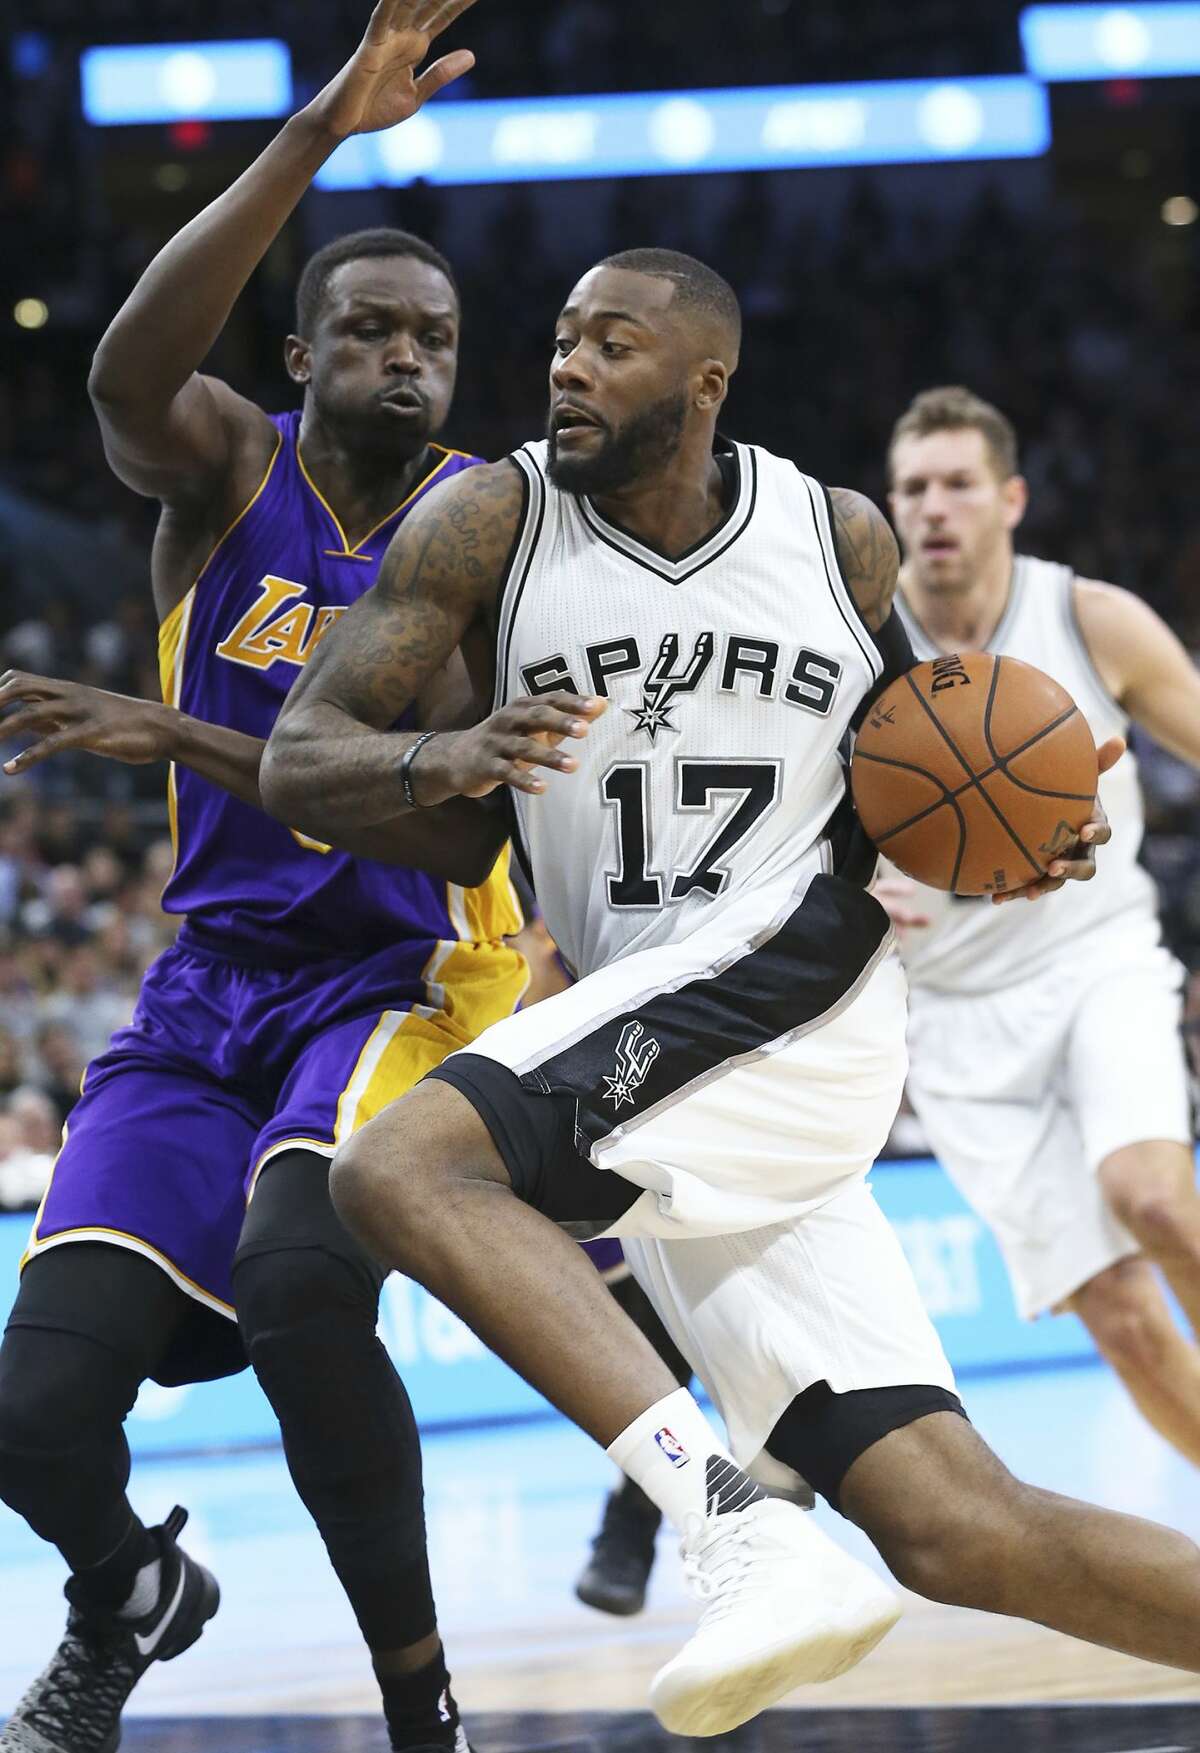 Jonathon Simmons streaks to the hoop in the first half against Luol Deng as the Spurs host the Lakers at the AT&T Center on January, 12, 2017.